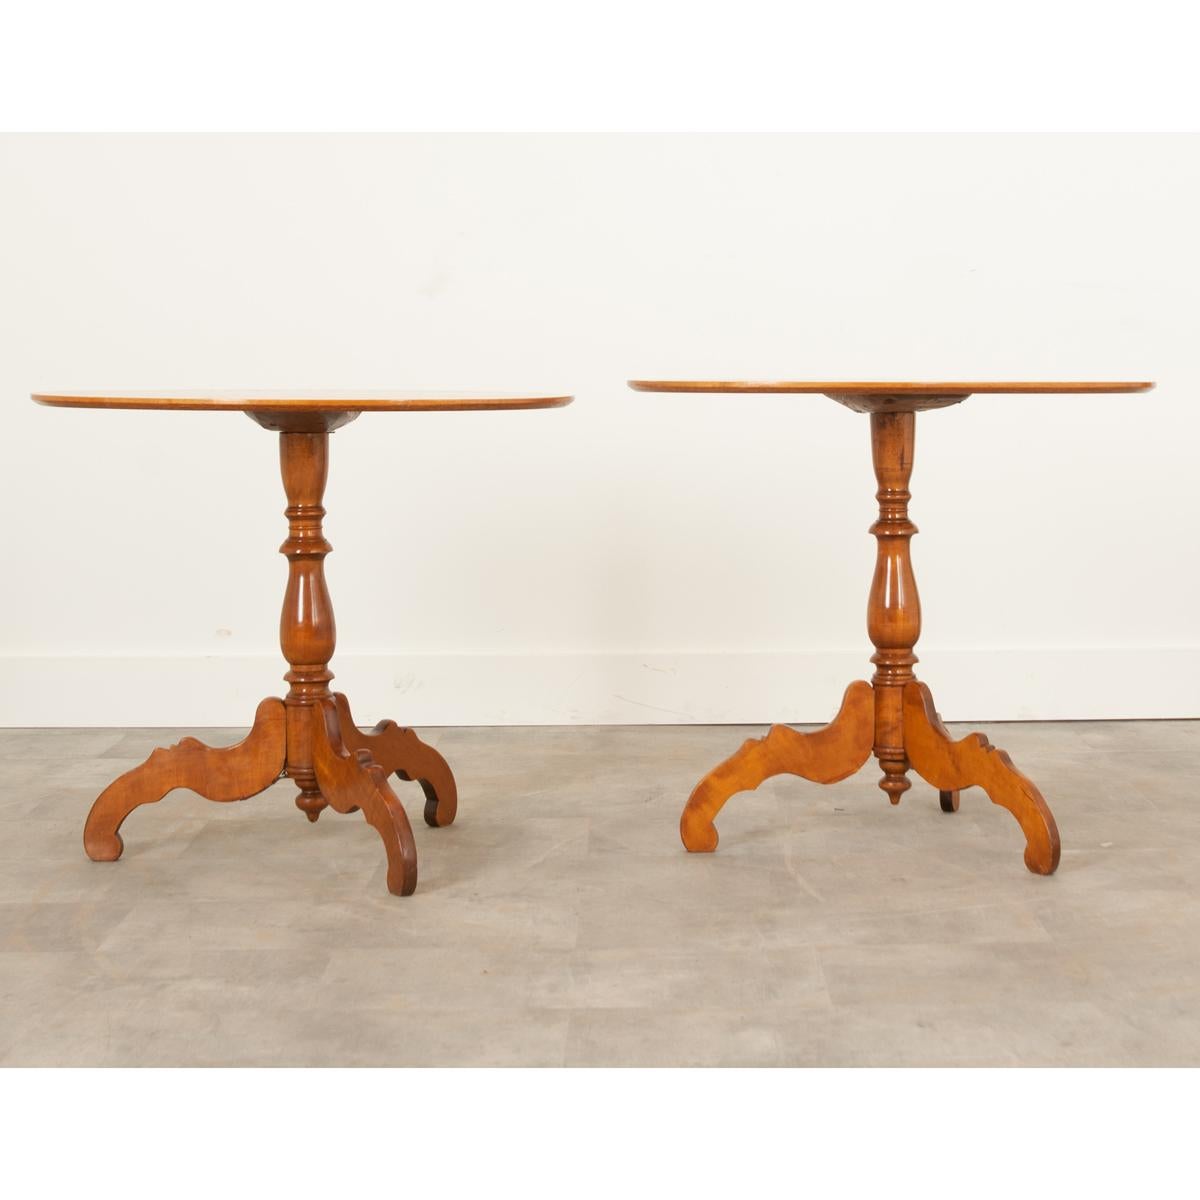 Pair of Dutch oval tables crafted in the 1800’s from gorgeous satinwood. In wonderful condition, they have been recently cleaned and polished with French wax paste to revitalize the vibrant wood. Their moderate size and classic design make it easy